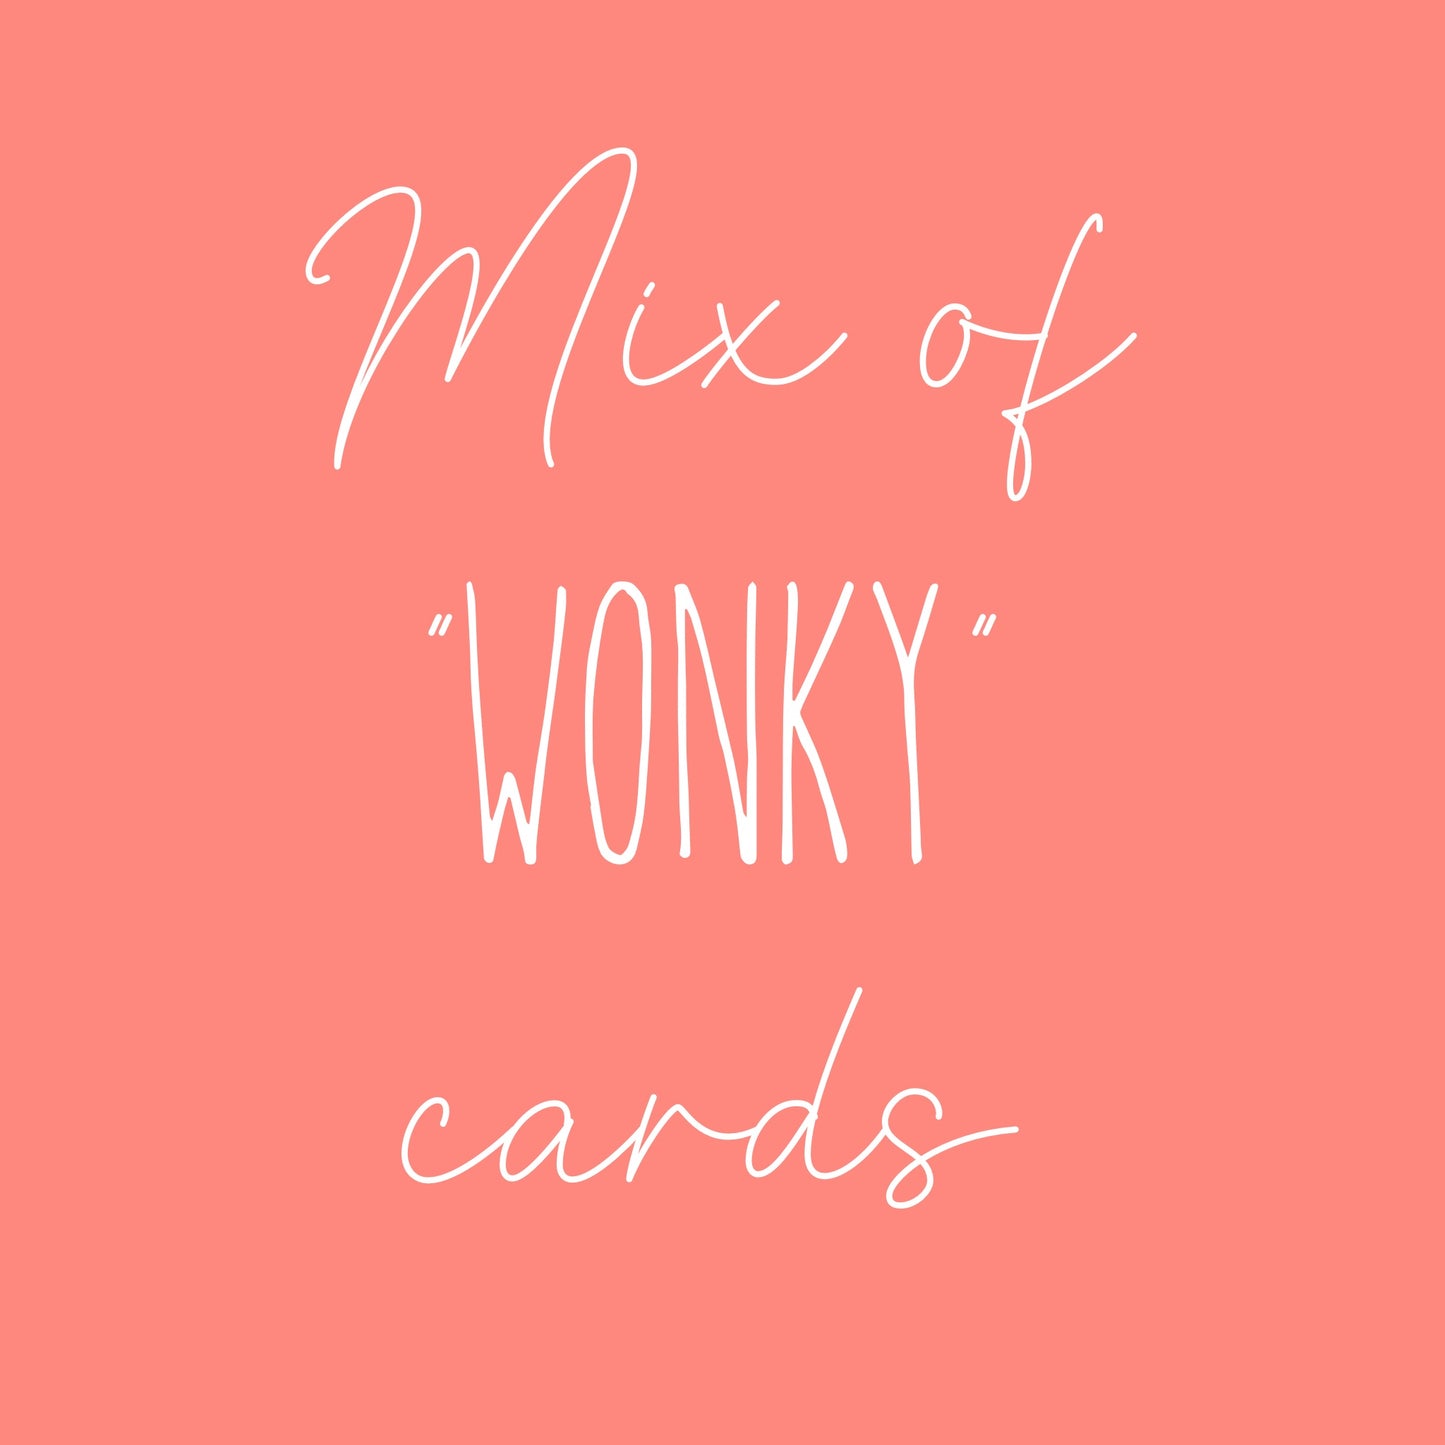 Mix of 15 Wonky Cards